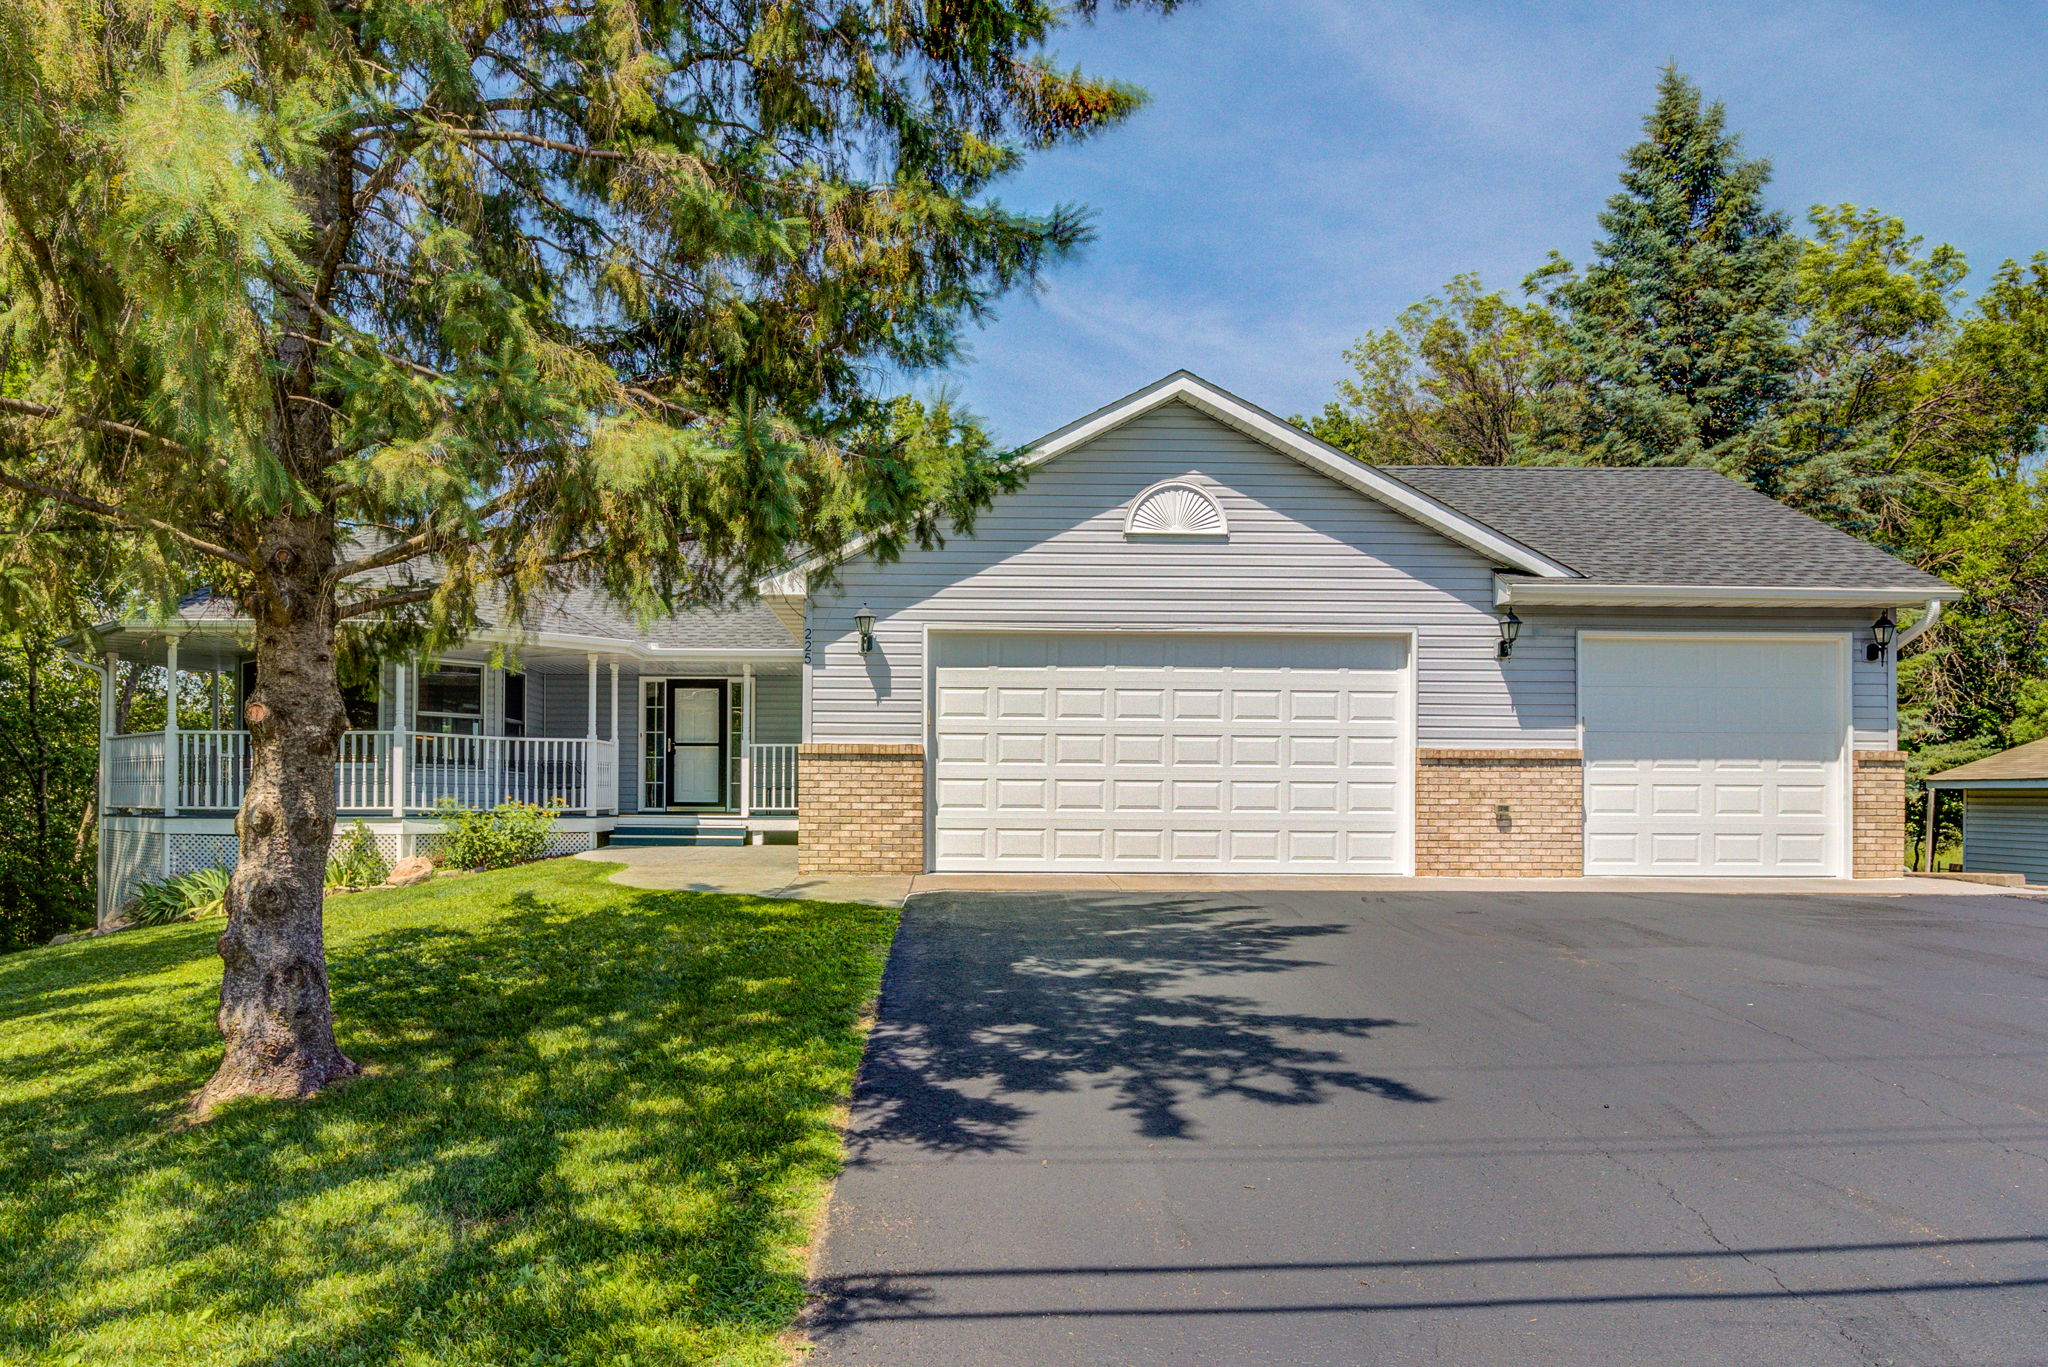  225 Sherwood Rd, Shoreview, MN 55126, US